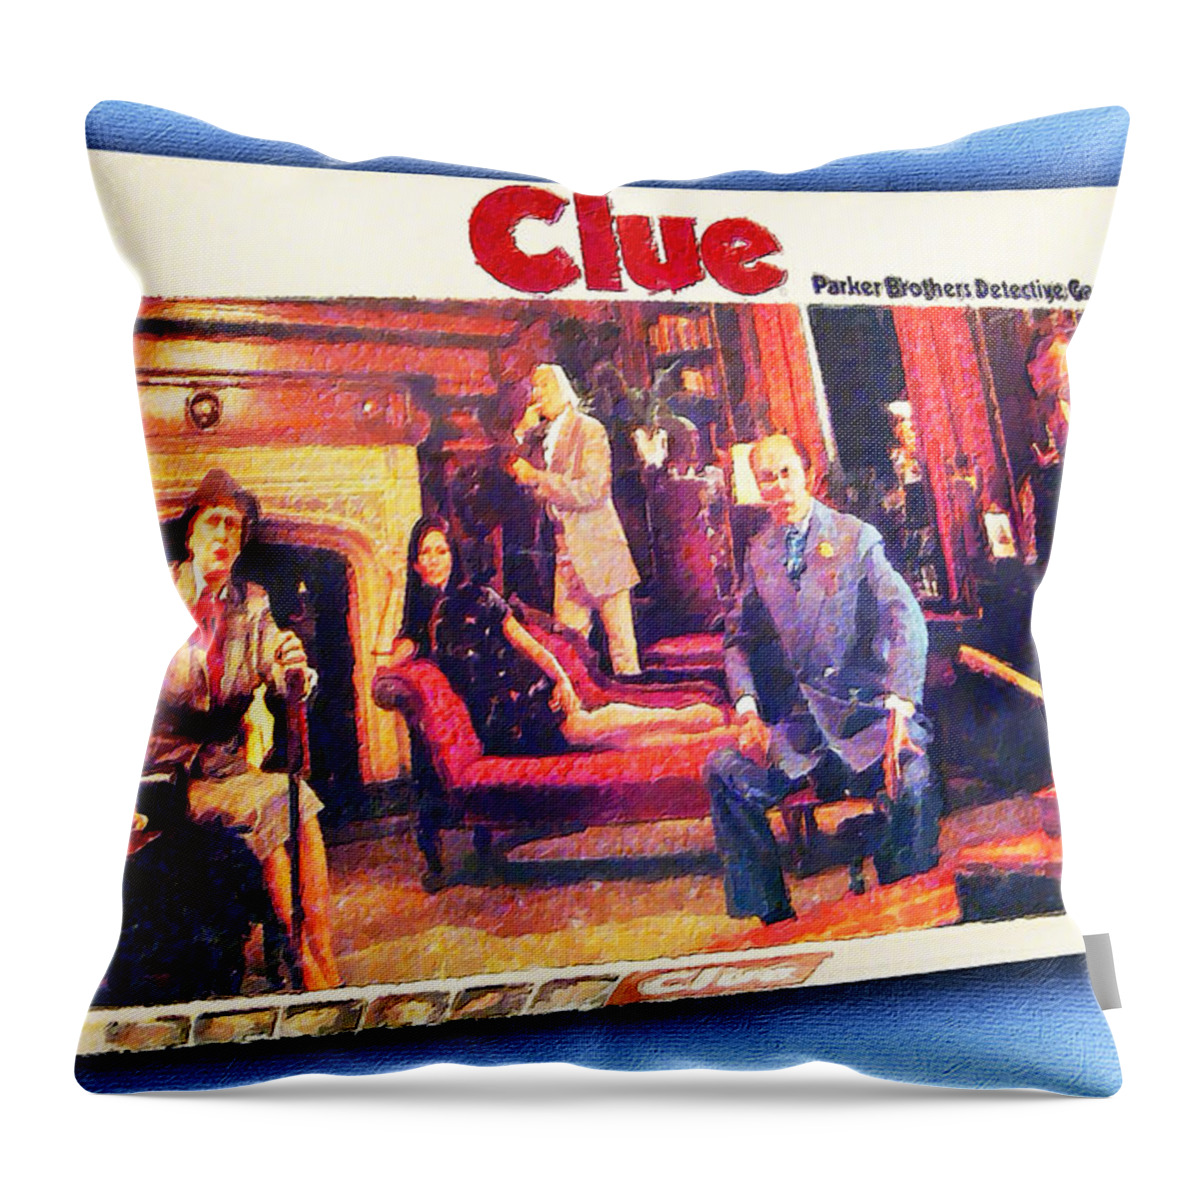 Clue Throw Pillow featuring the painting Clue Board Game Painting by Tony Rubino